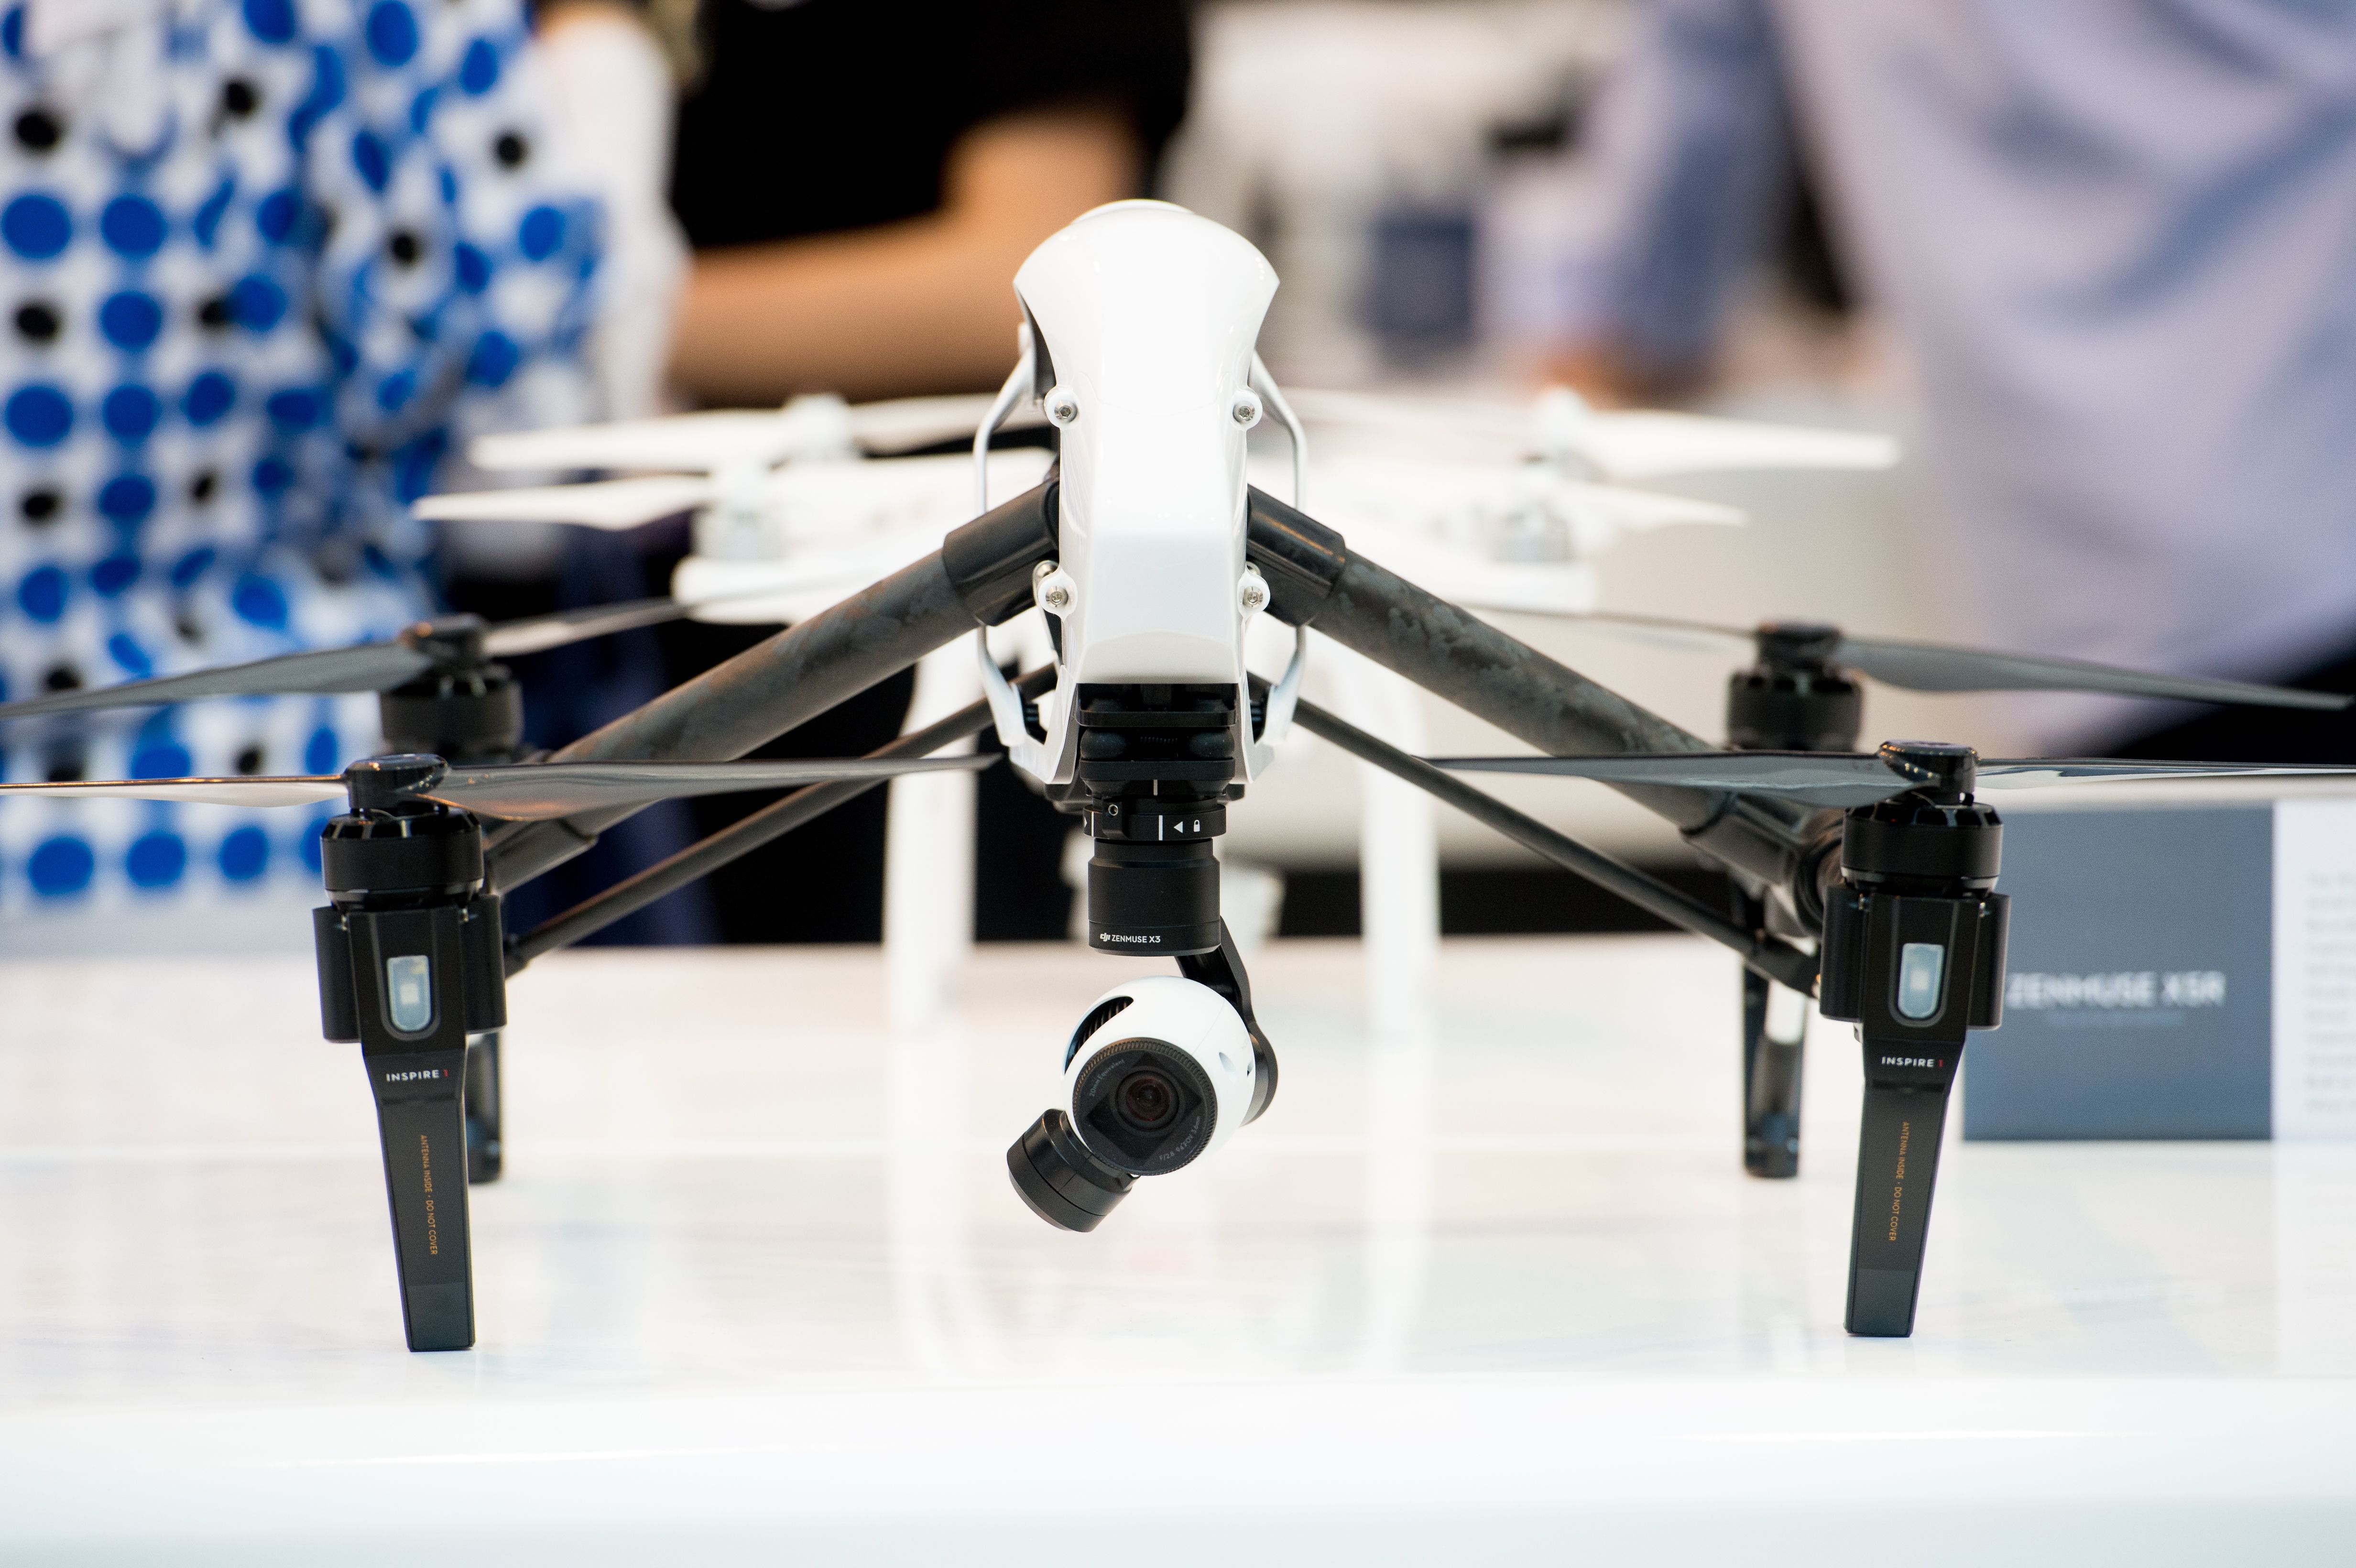 Lawmakers want Biden to reject export licenses for Chinese drone maker DJI